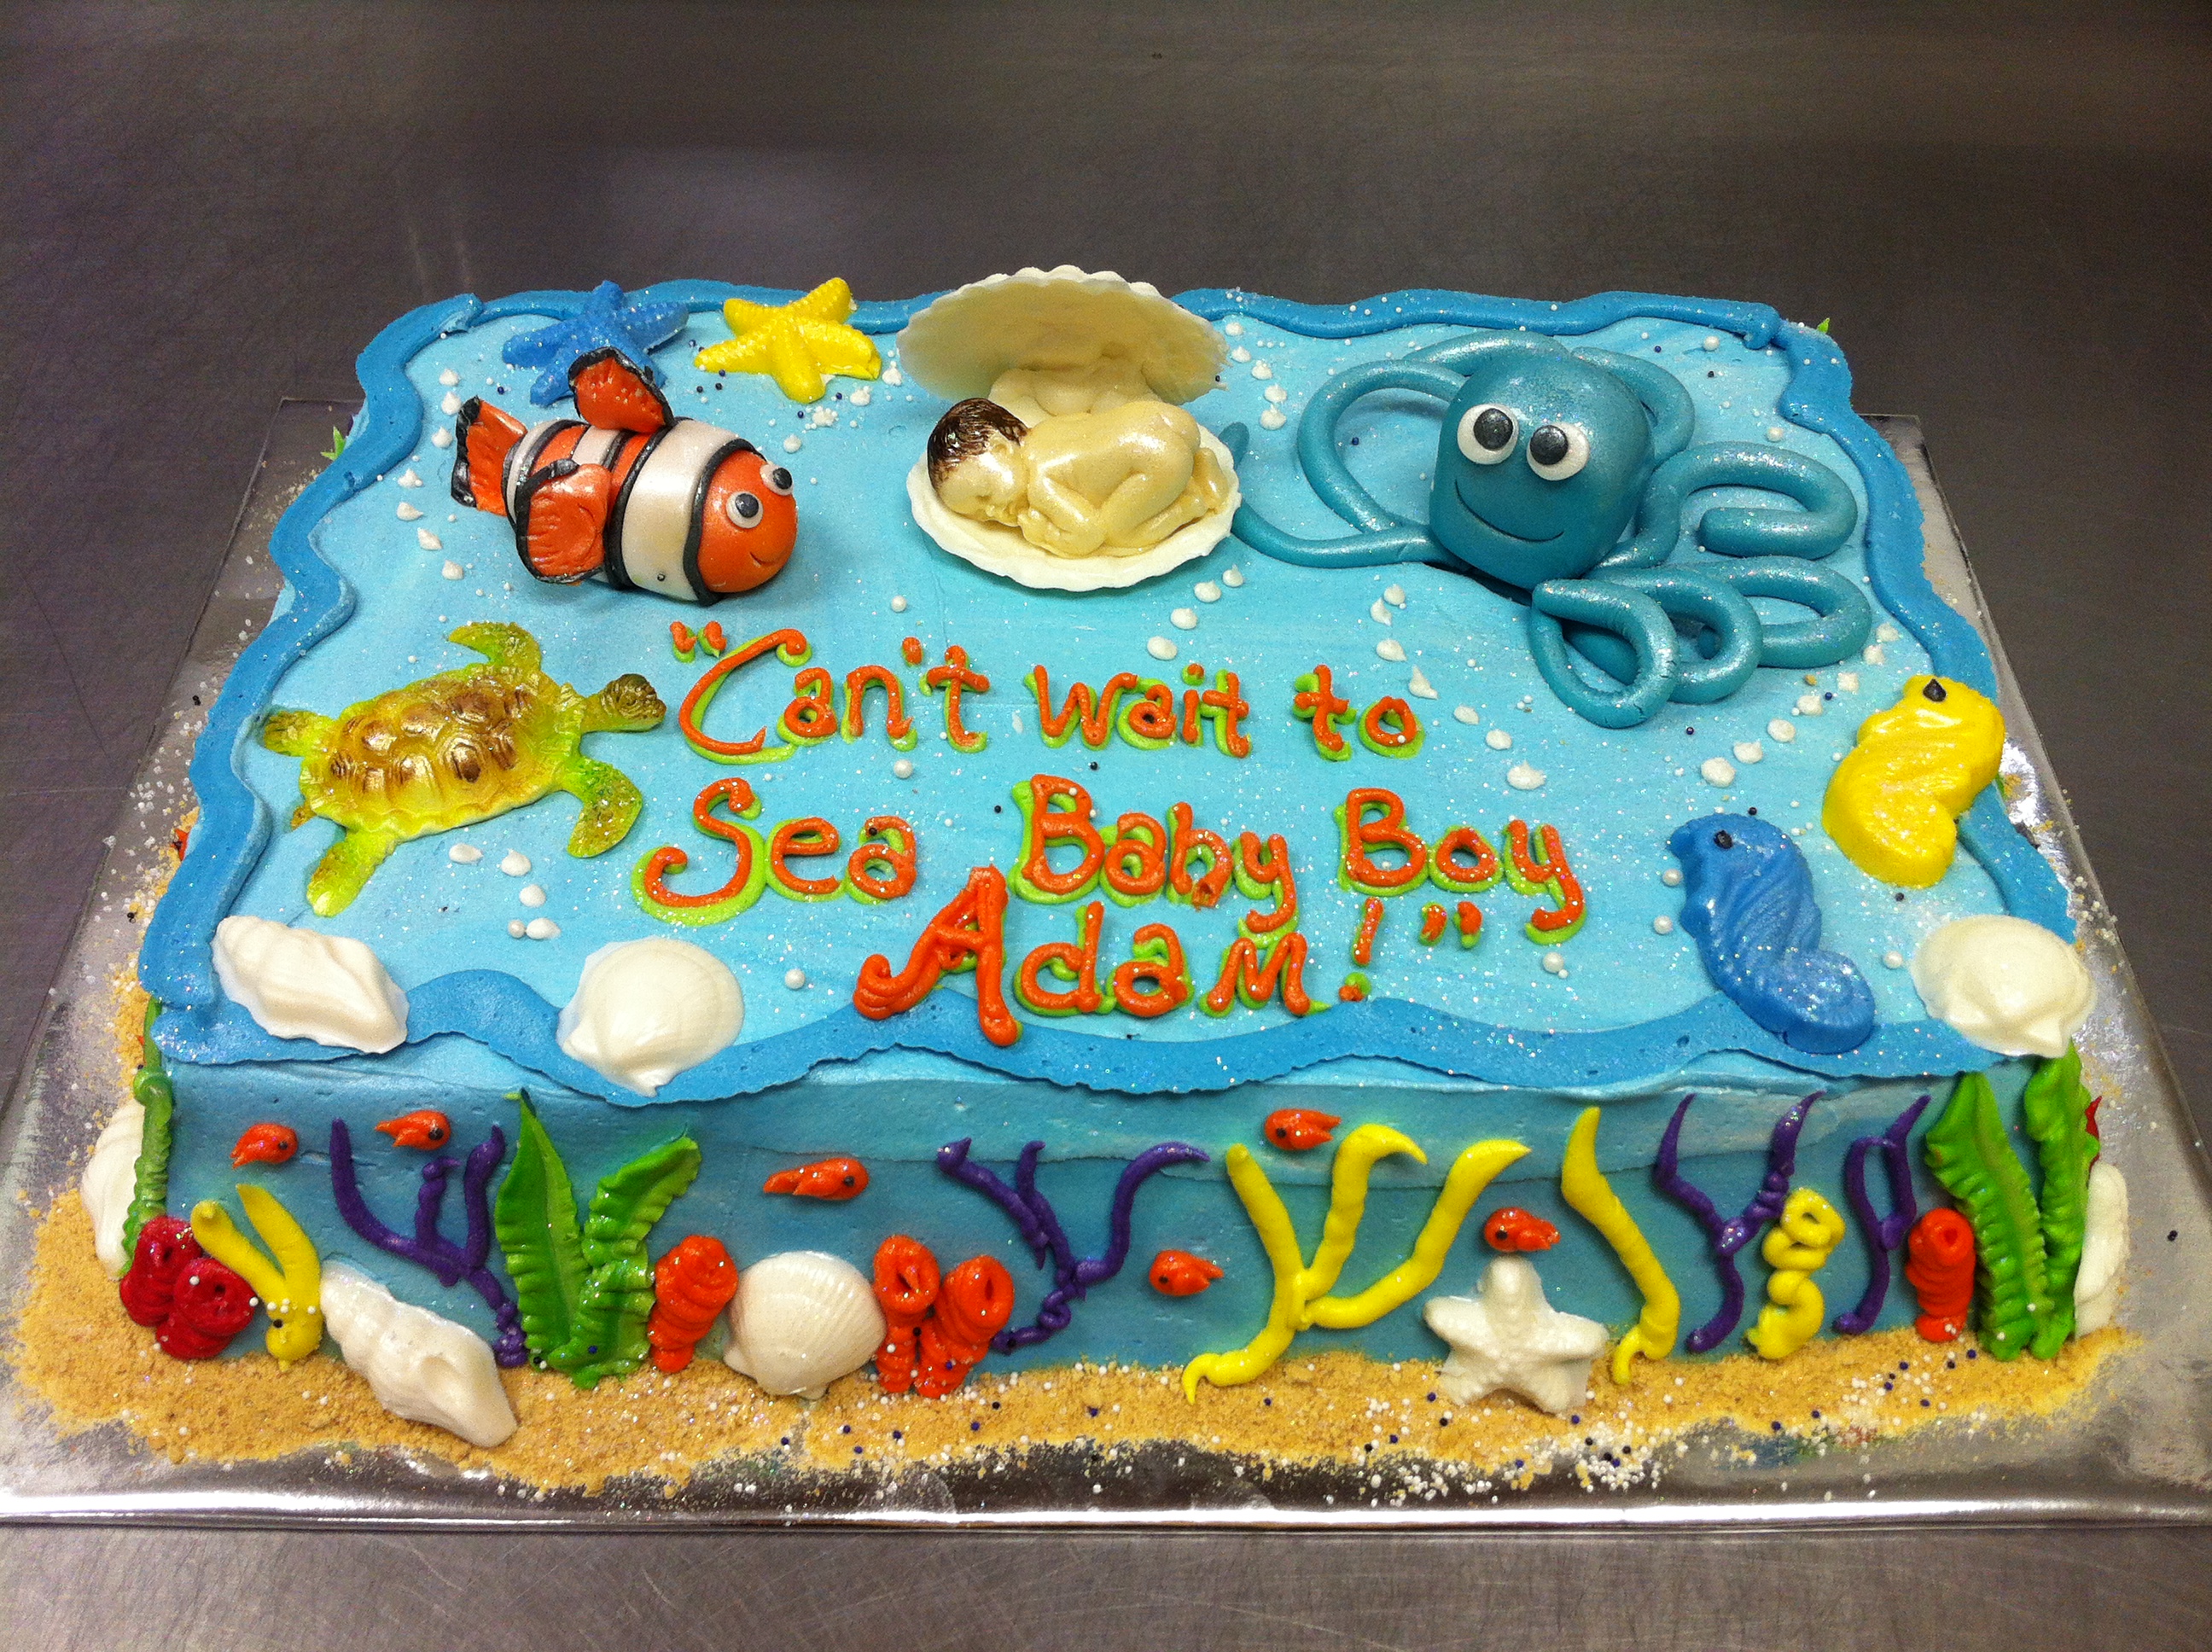 Under the Sea Themed Baby Shower Cake